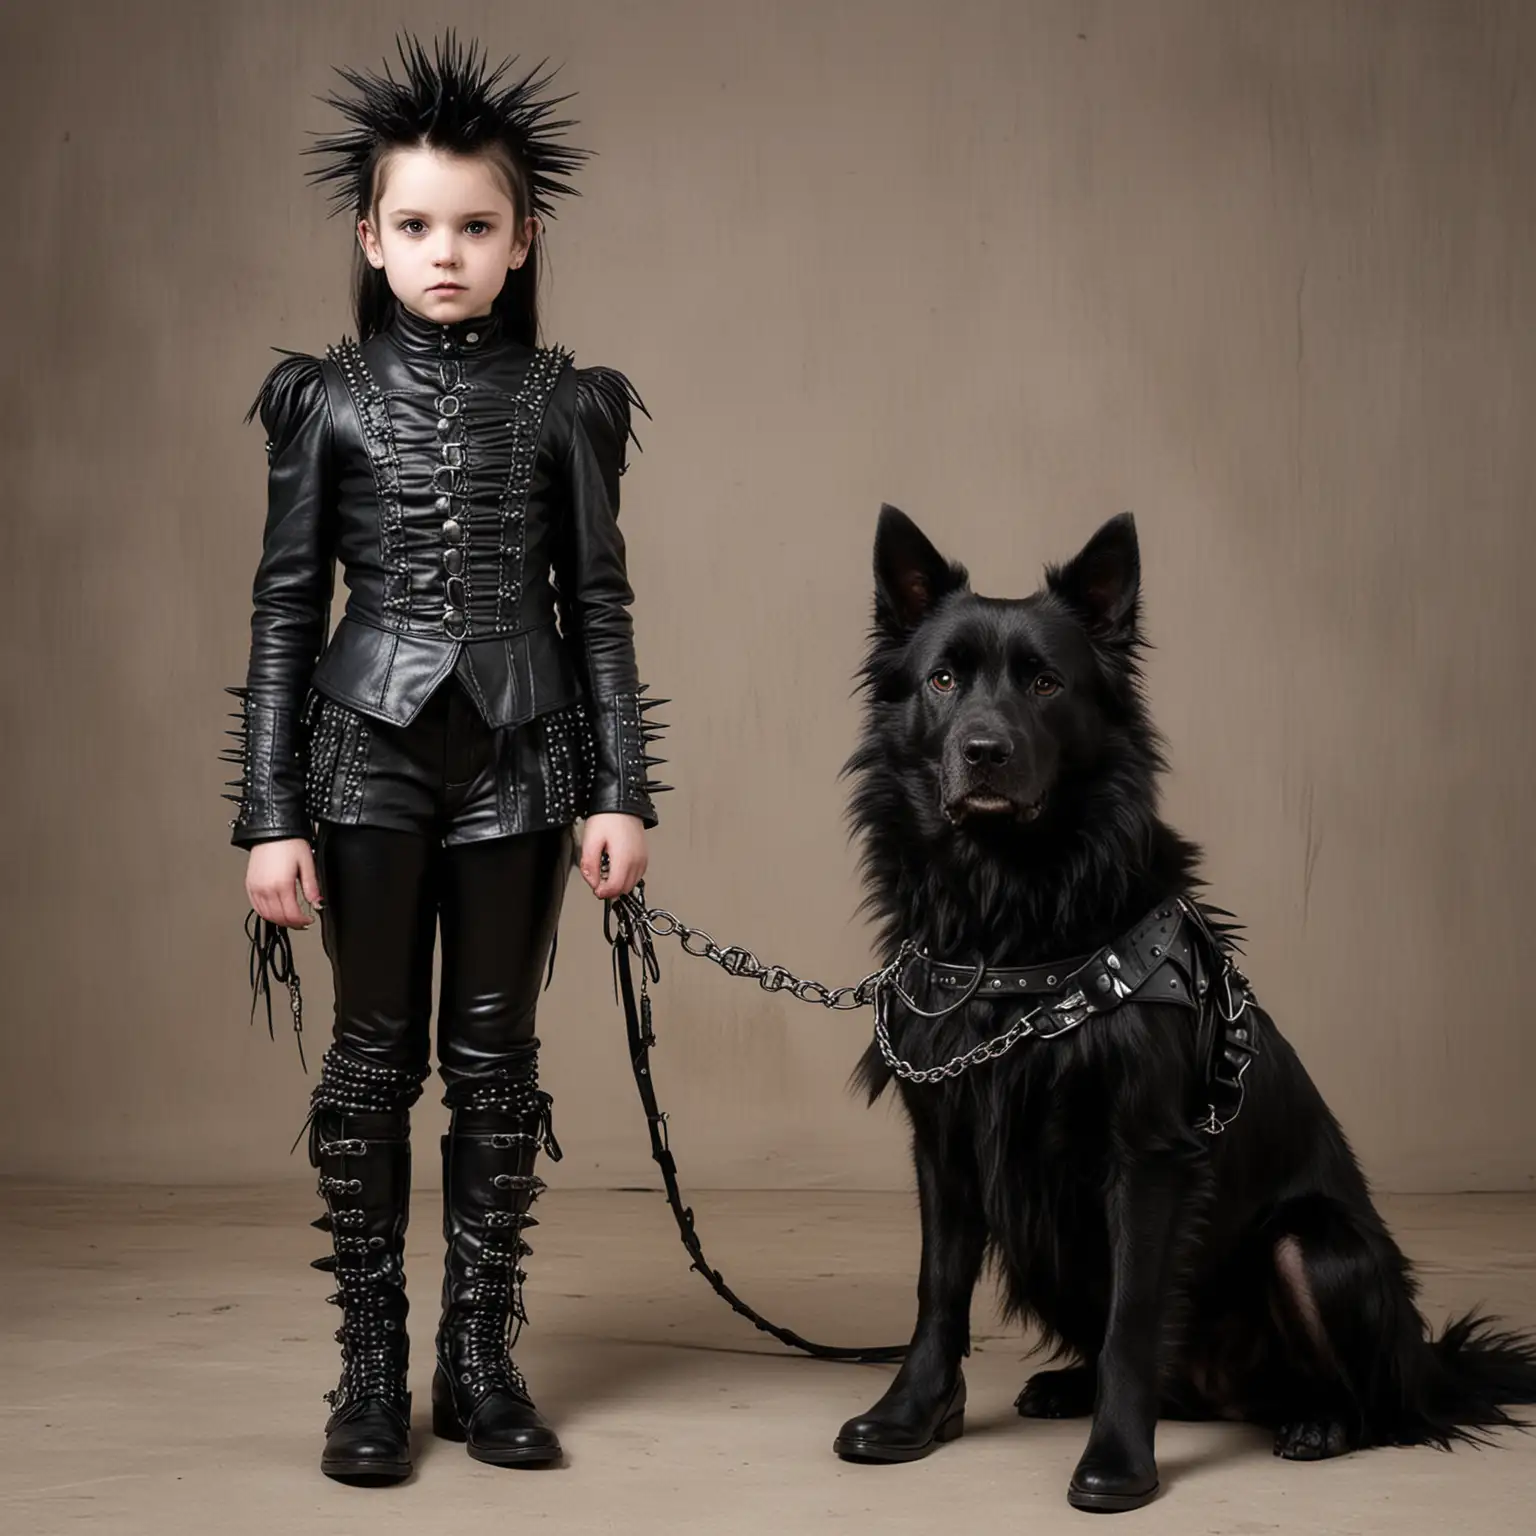 Goth-Princess-with-Leashed-Large-Dog-in-Spiky-Leather-Attire